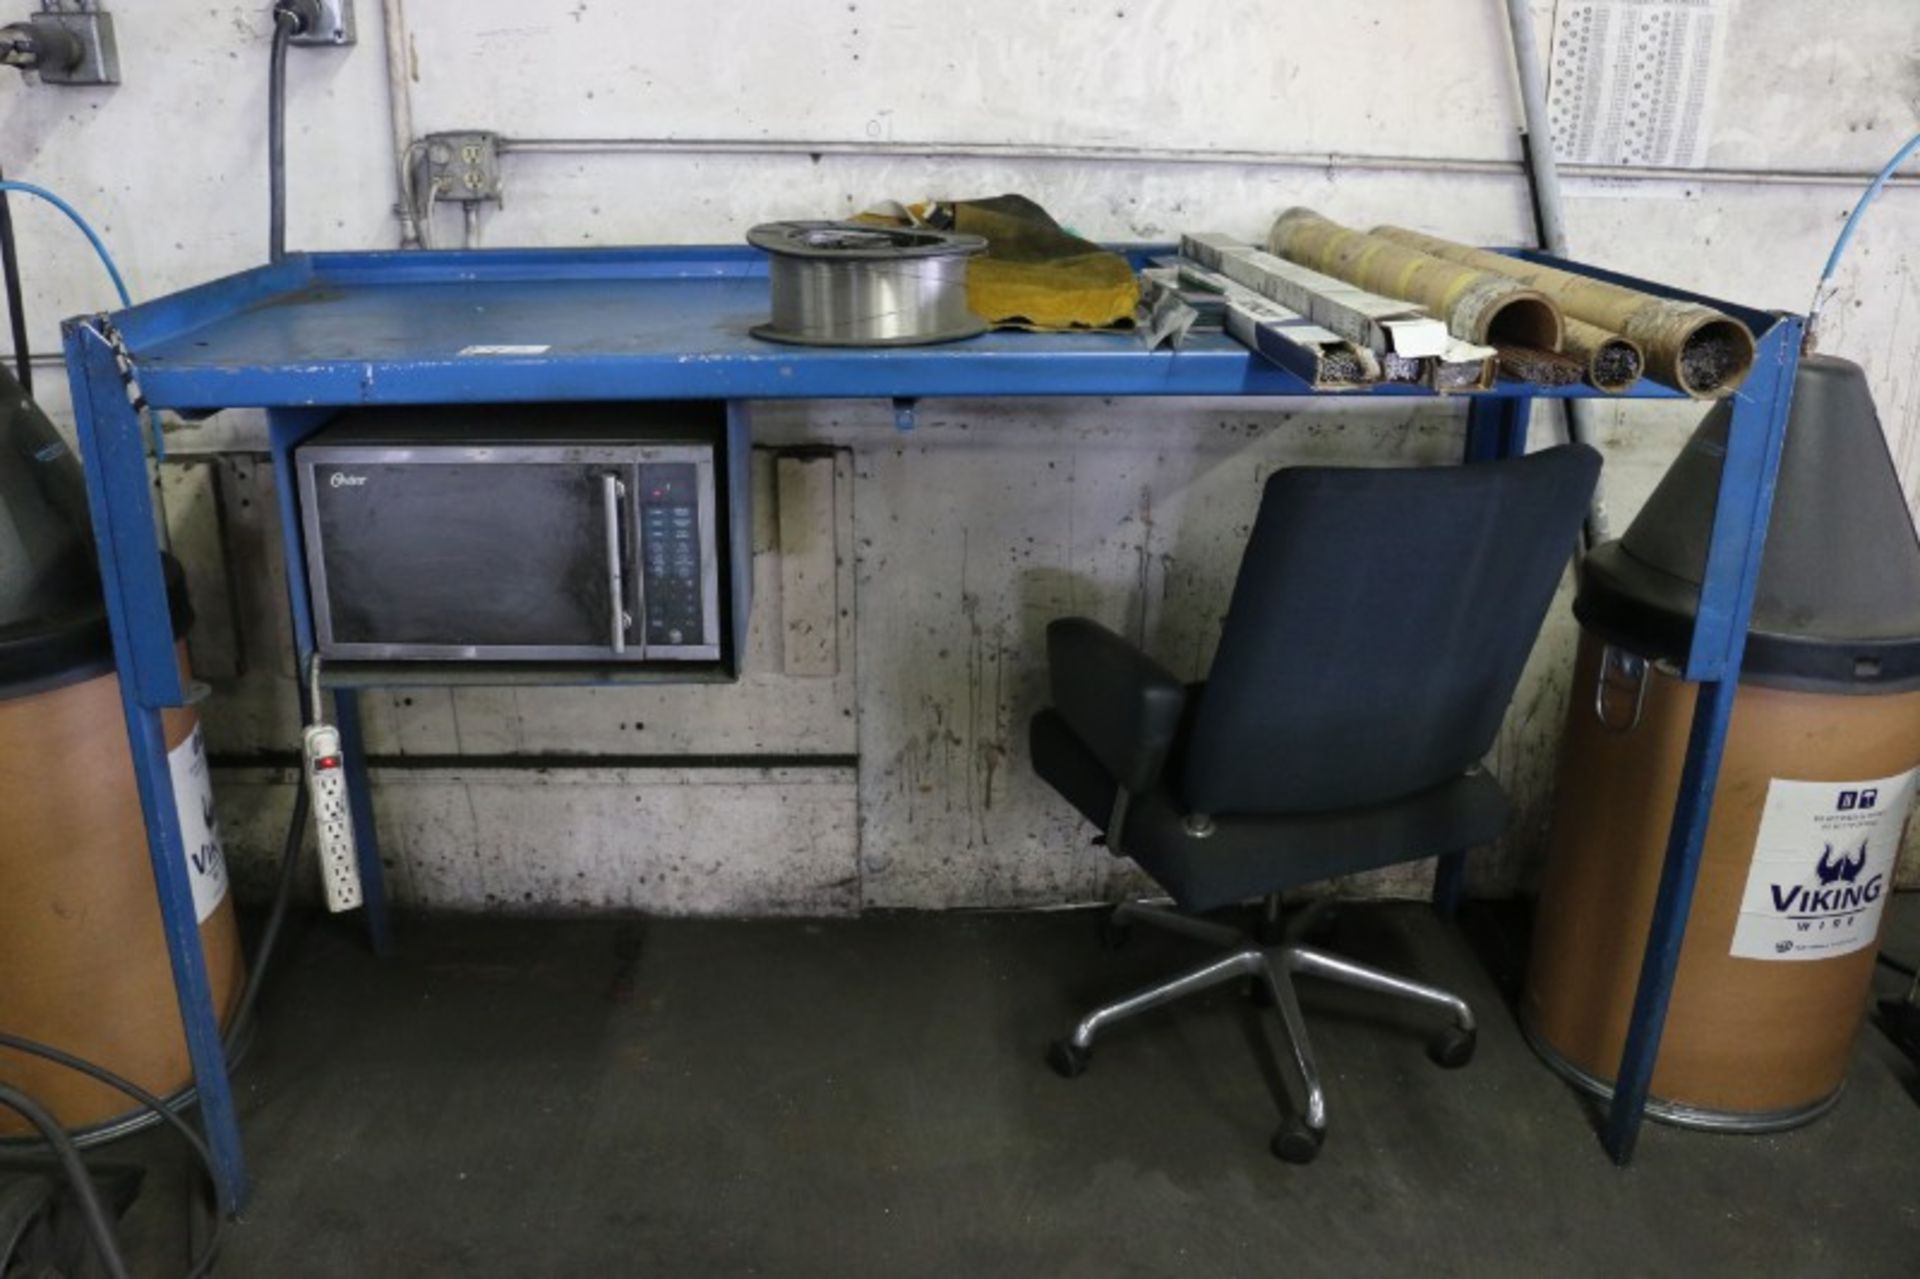 Work Bench with Assorted Welding Wire, Rods, and Microwave